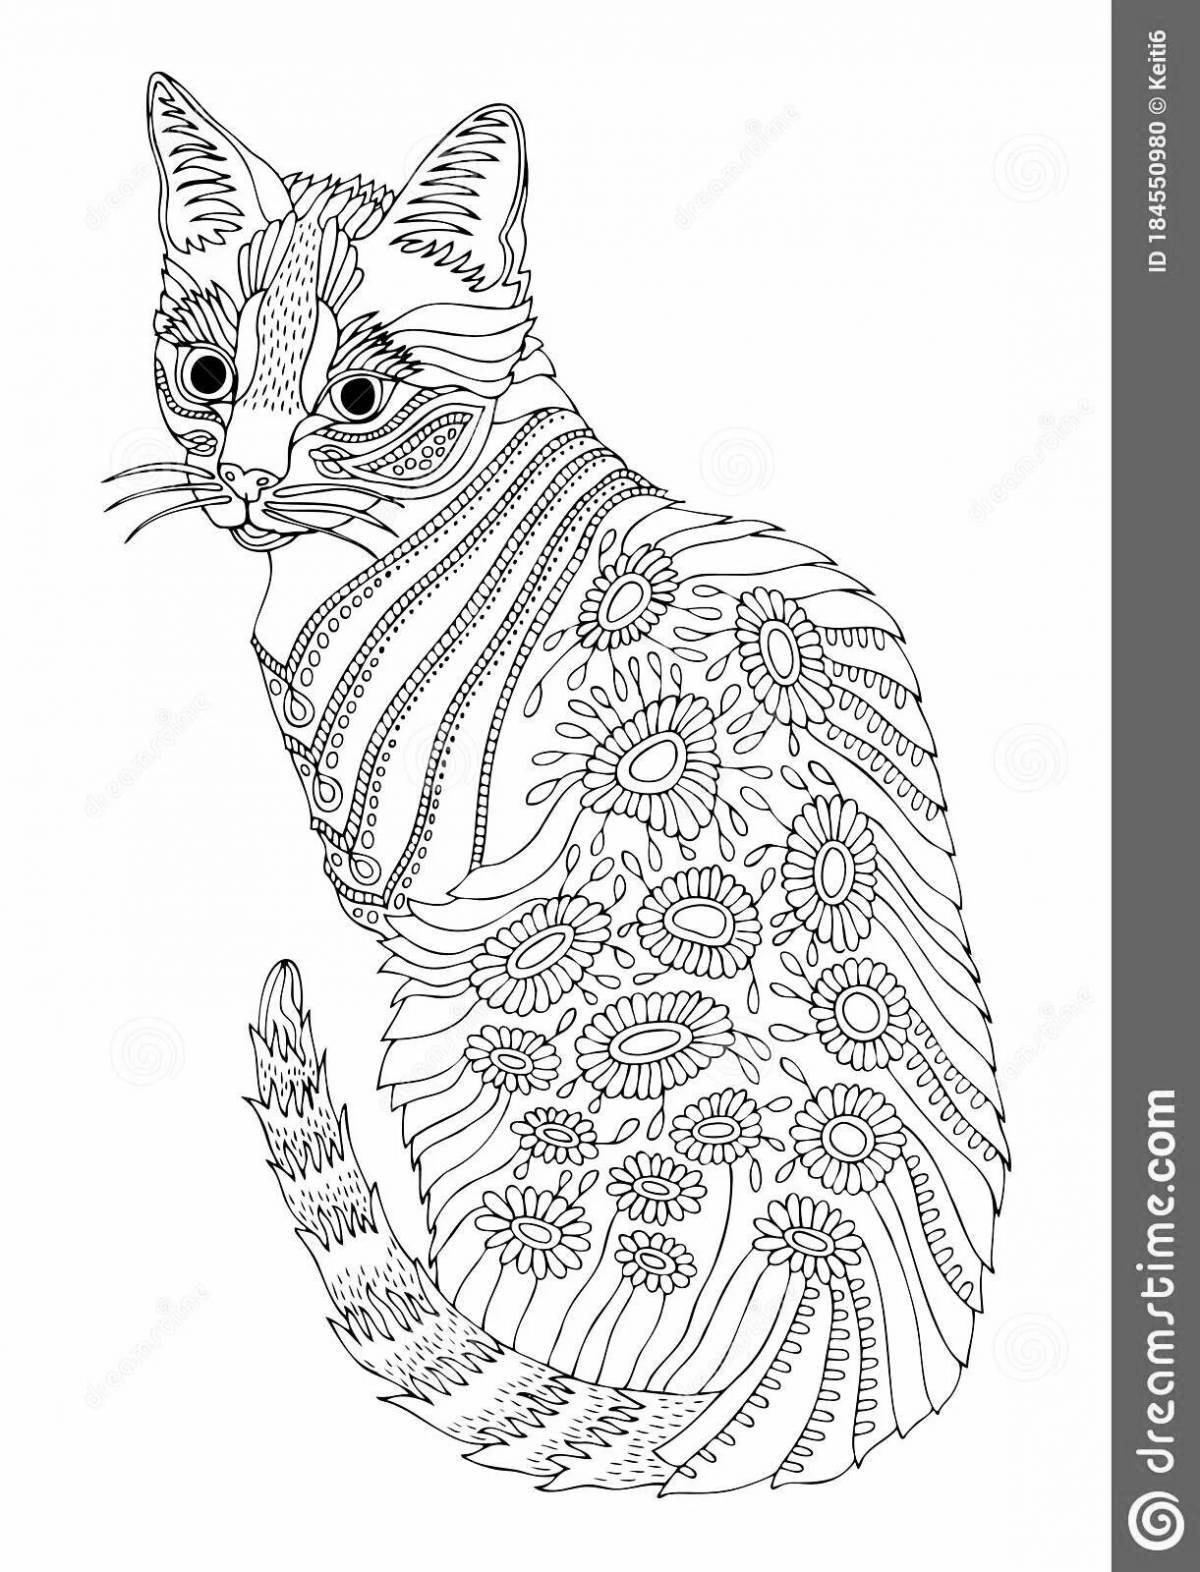 Coloring mandala with a radiant cat